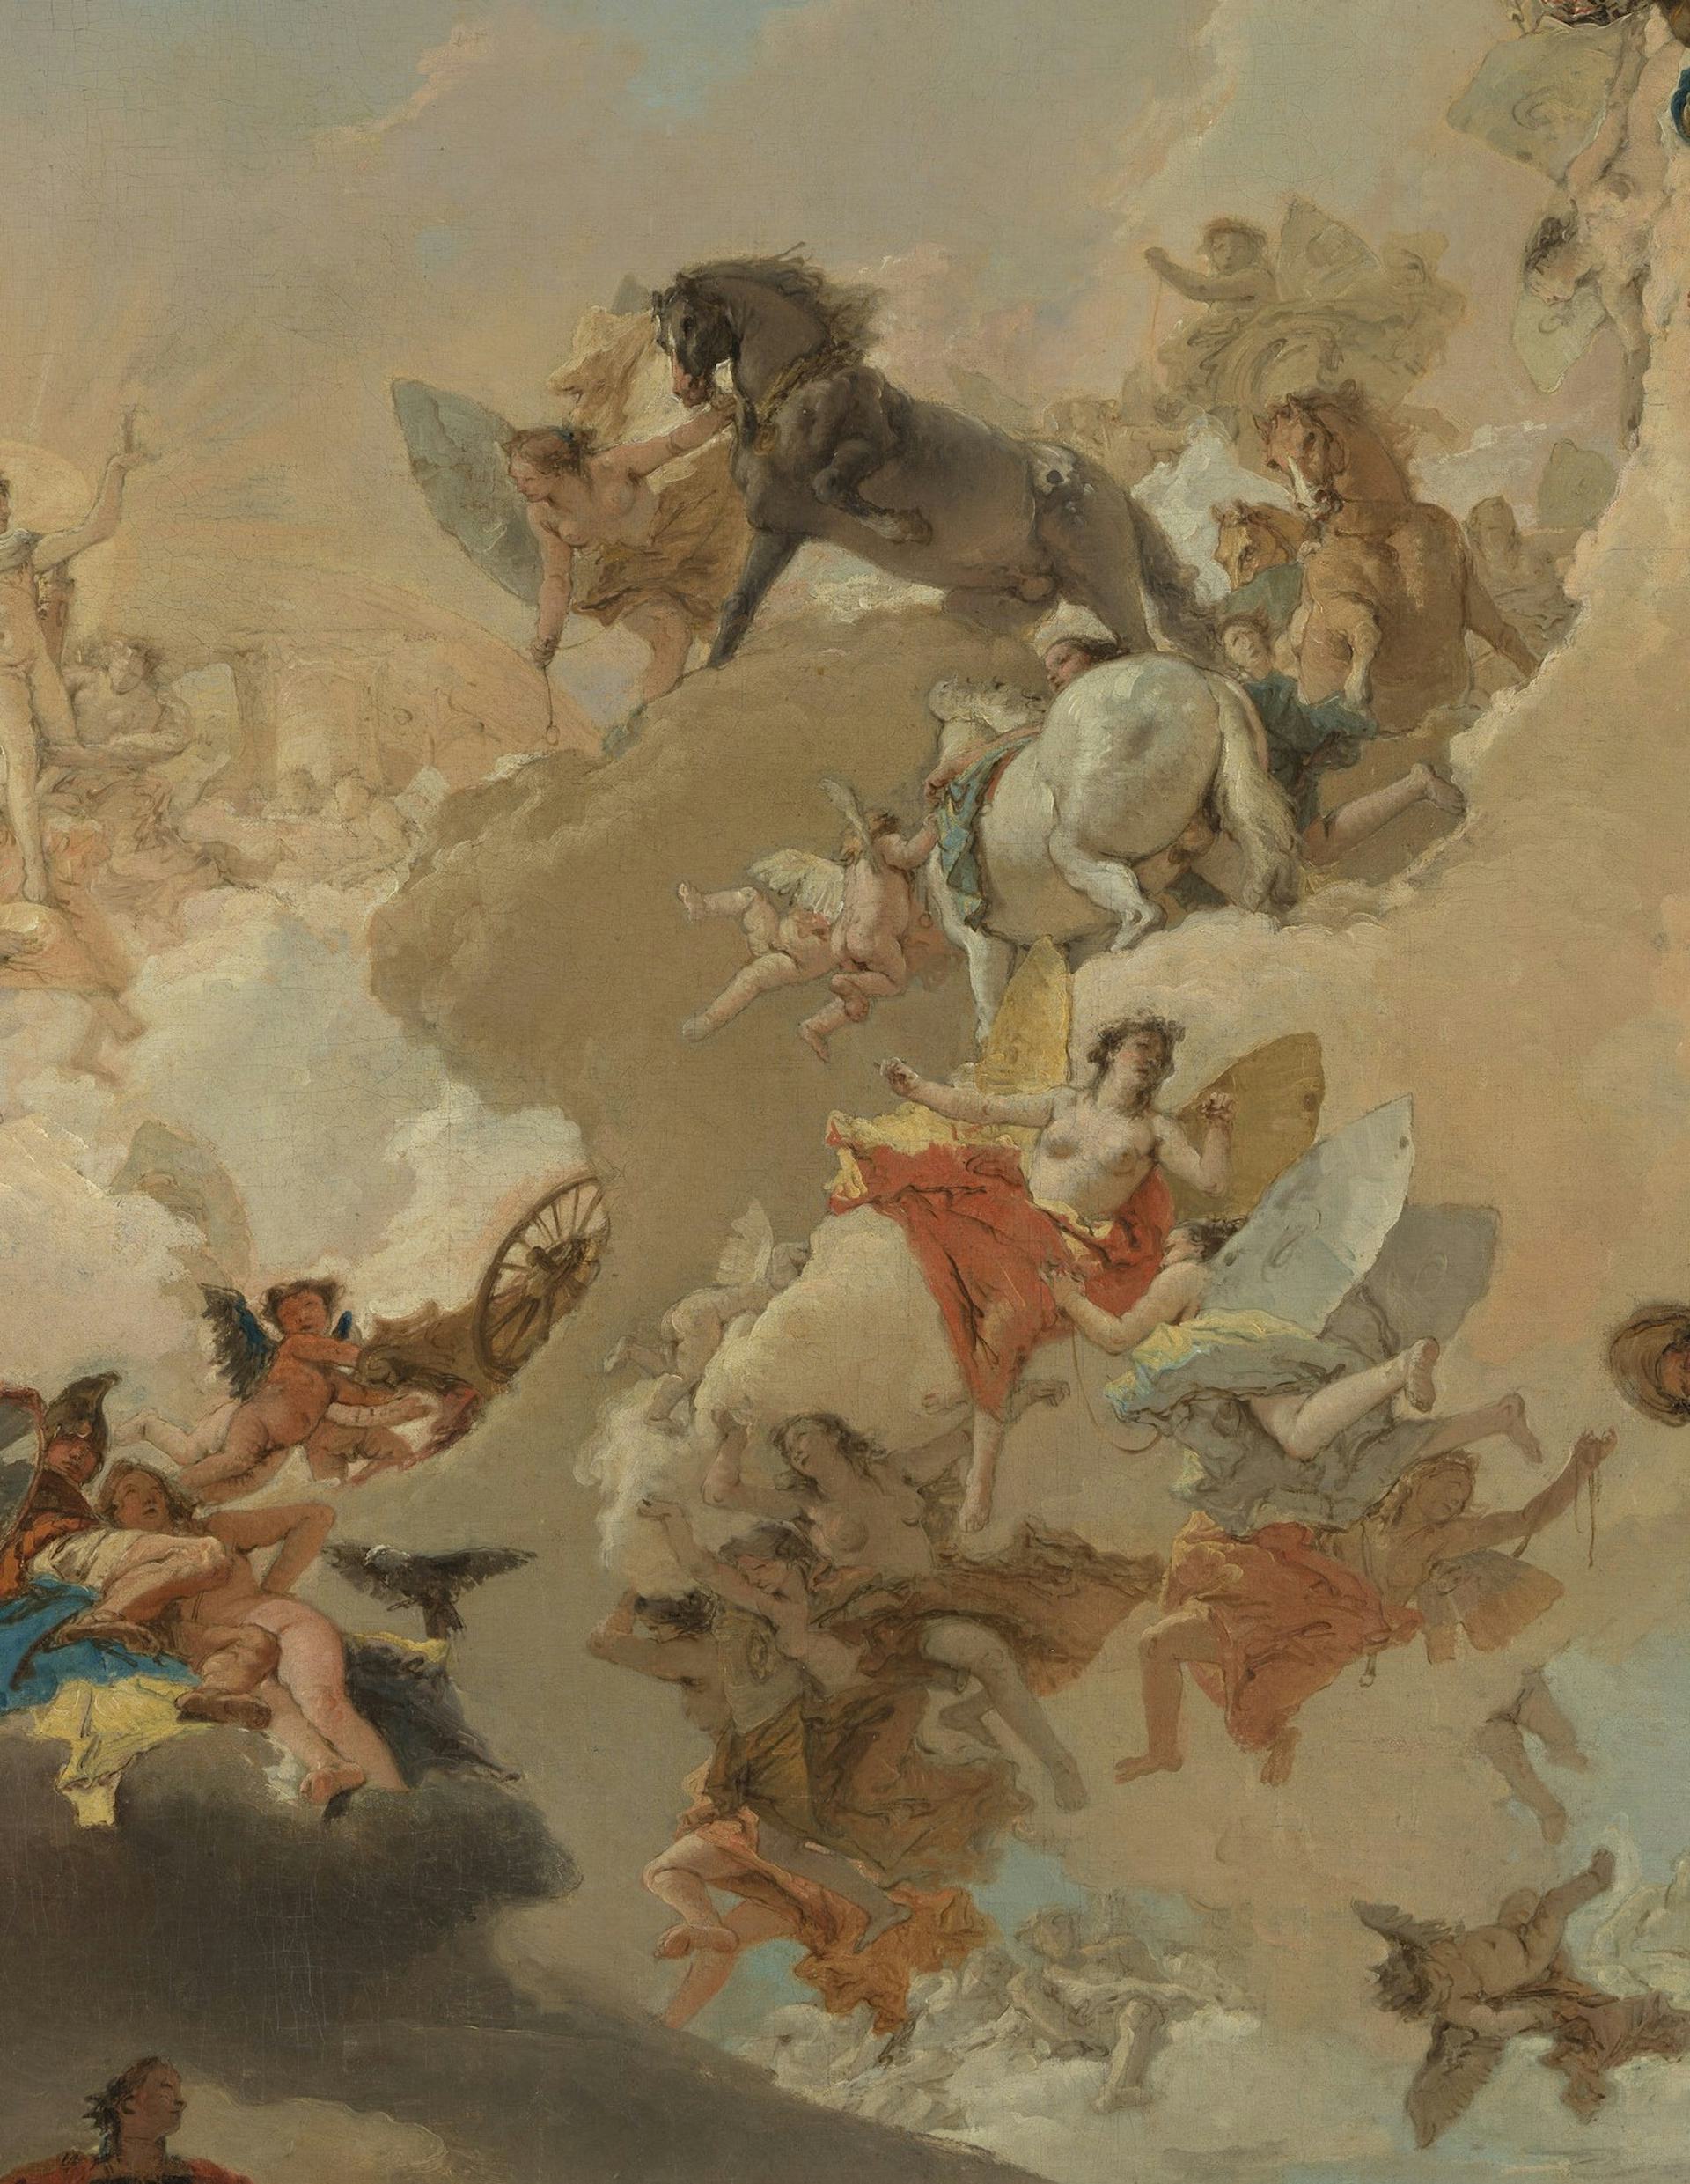 Detail from Allegory of the Planets and Continents by Giovanni Battista Tiepolo